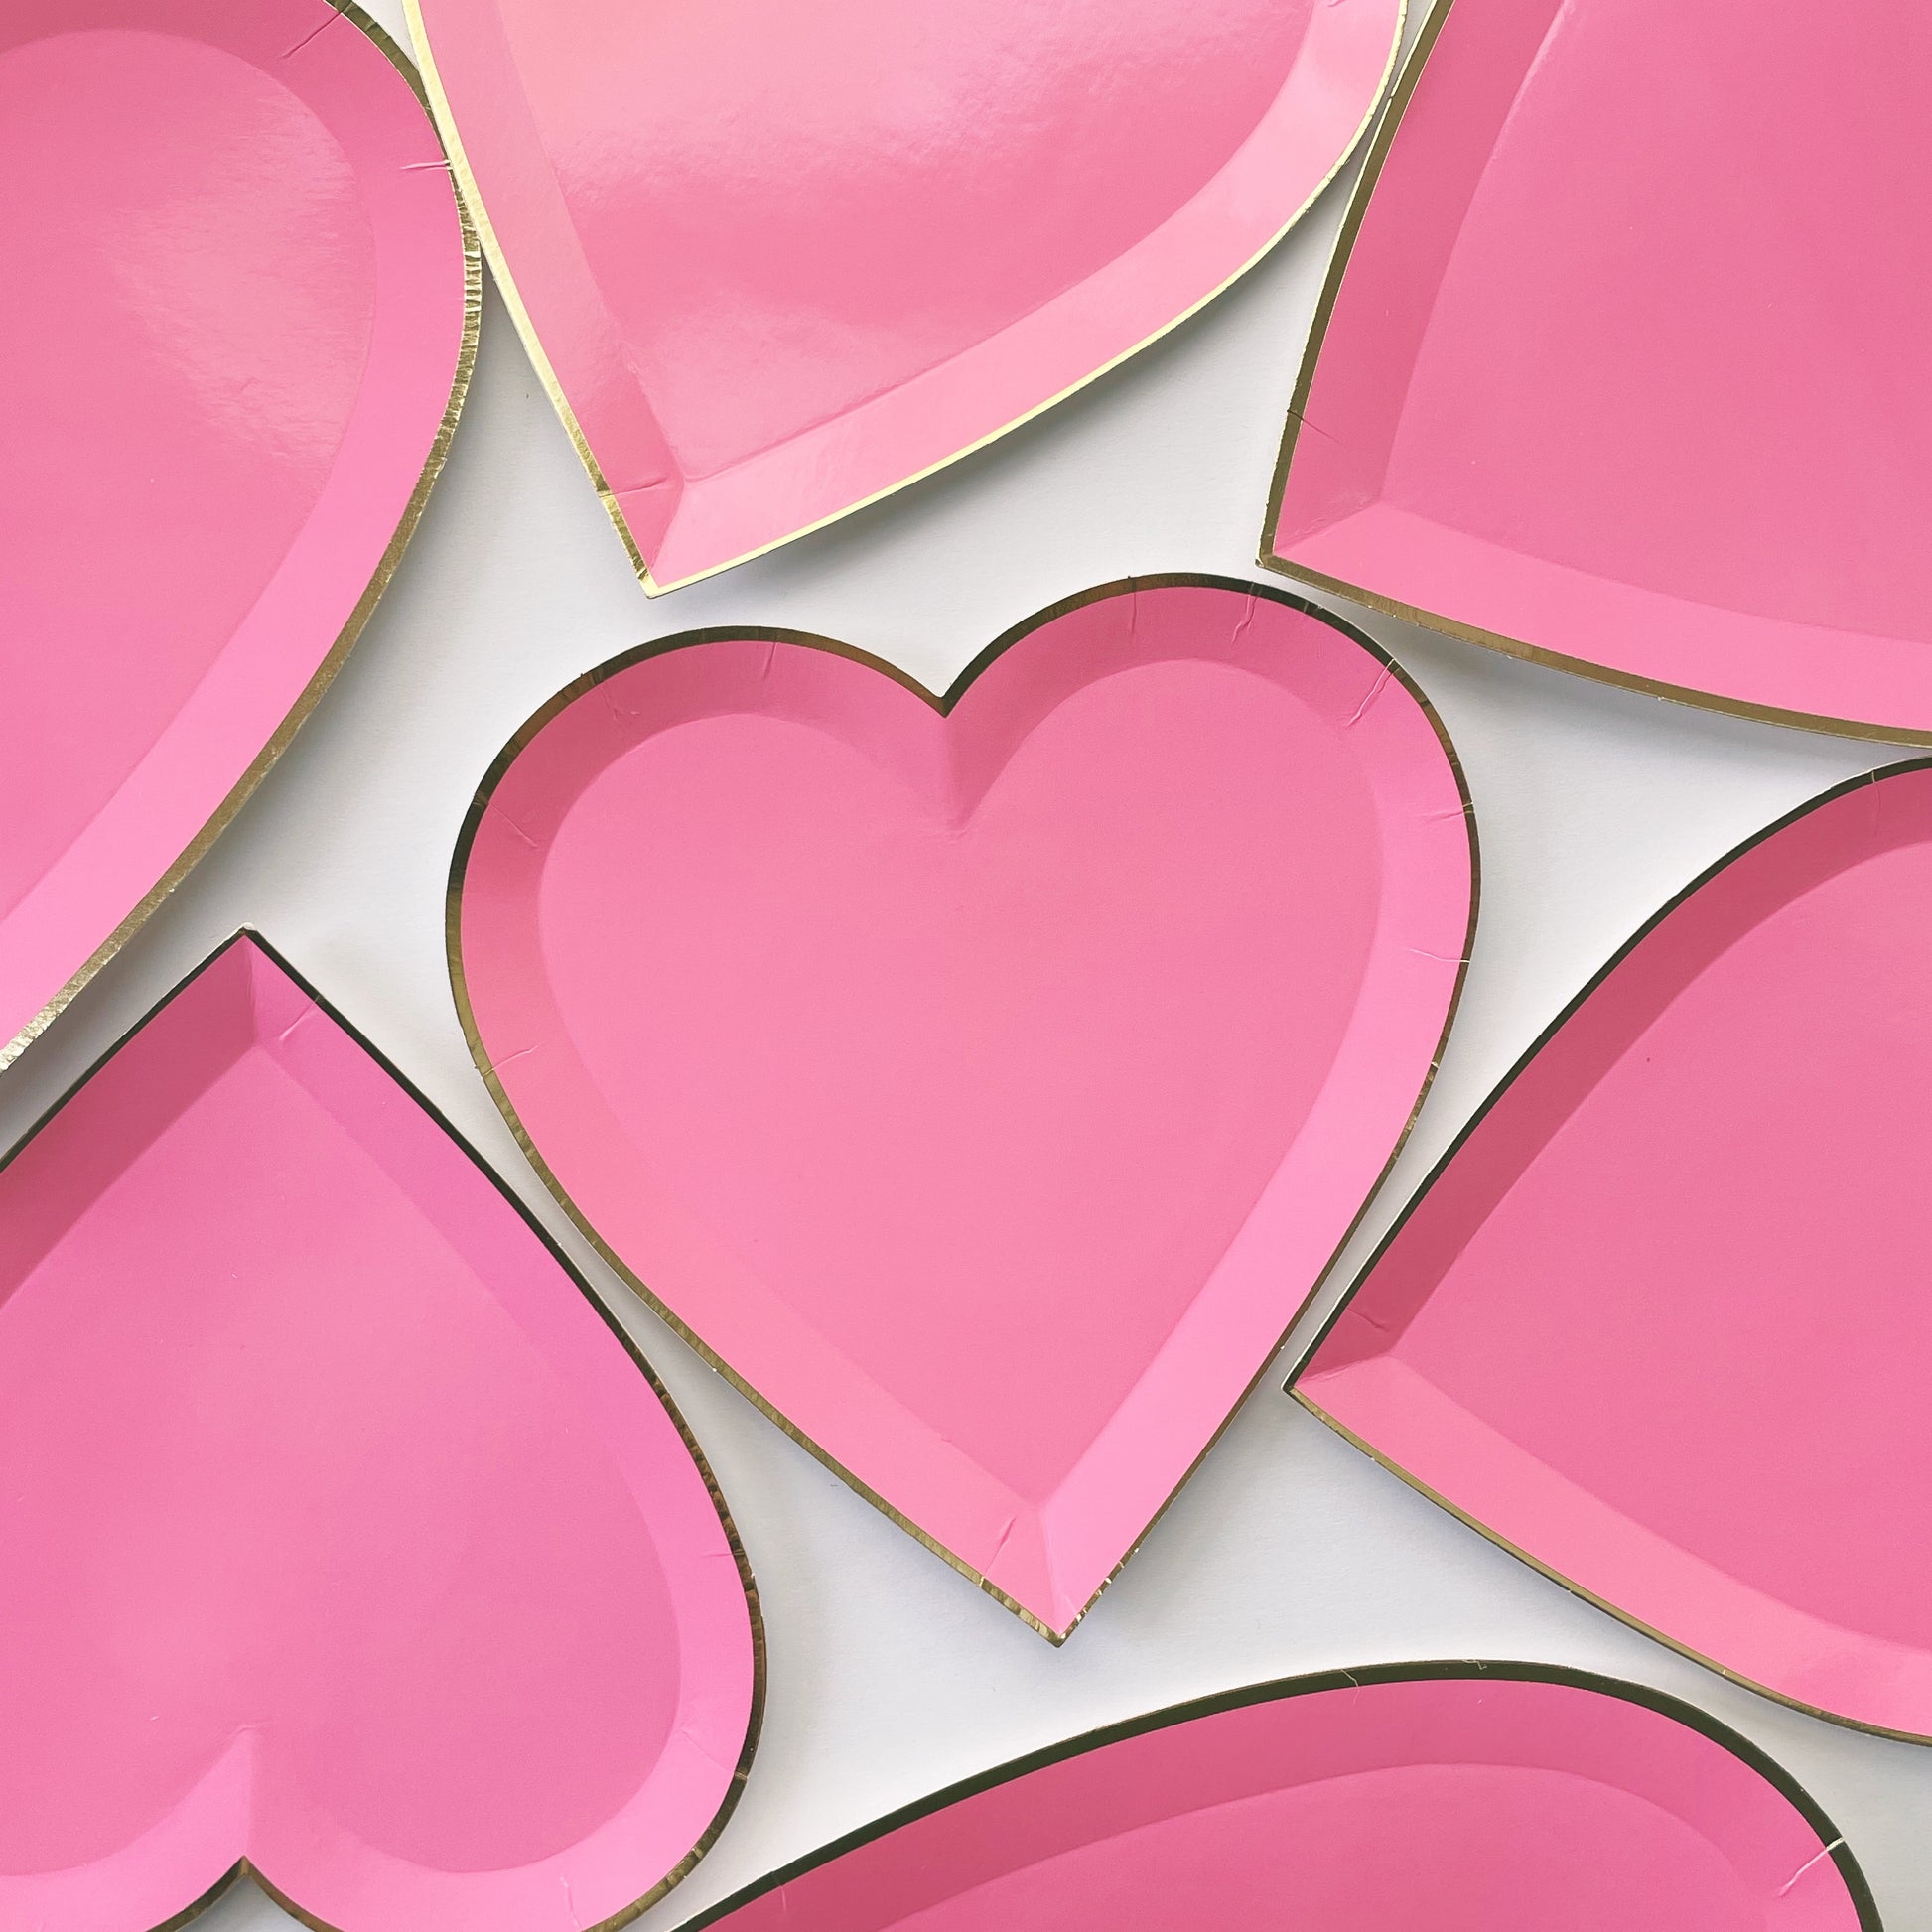 Bright pink heart shaped party plates, with a gold foil edge.